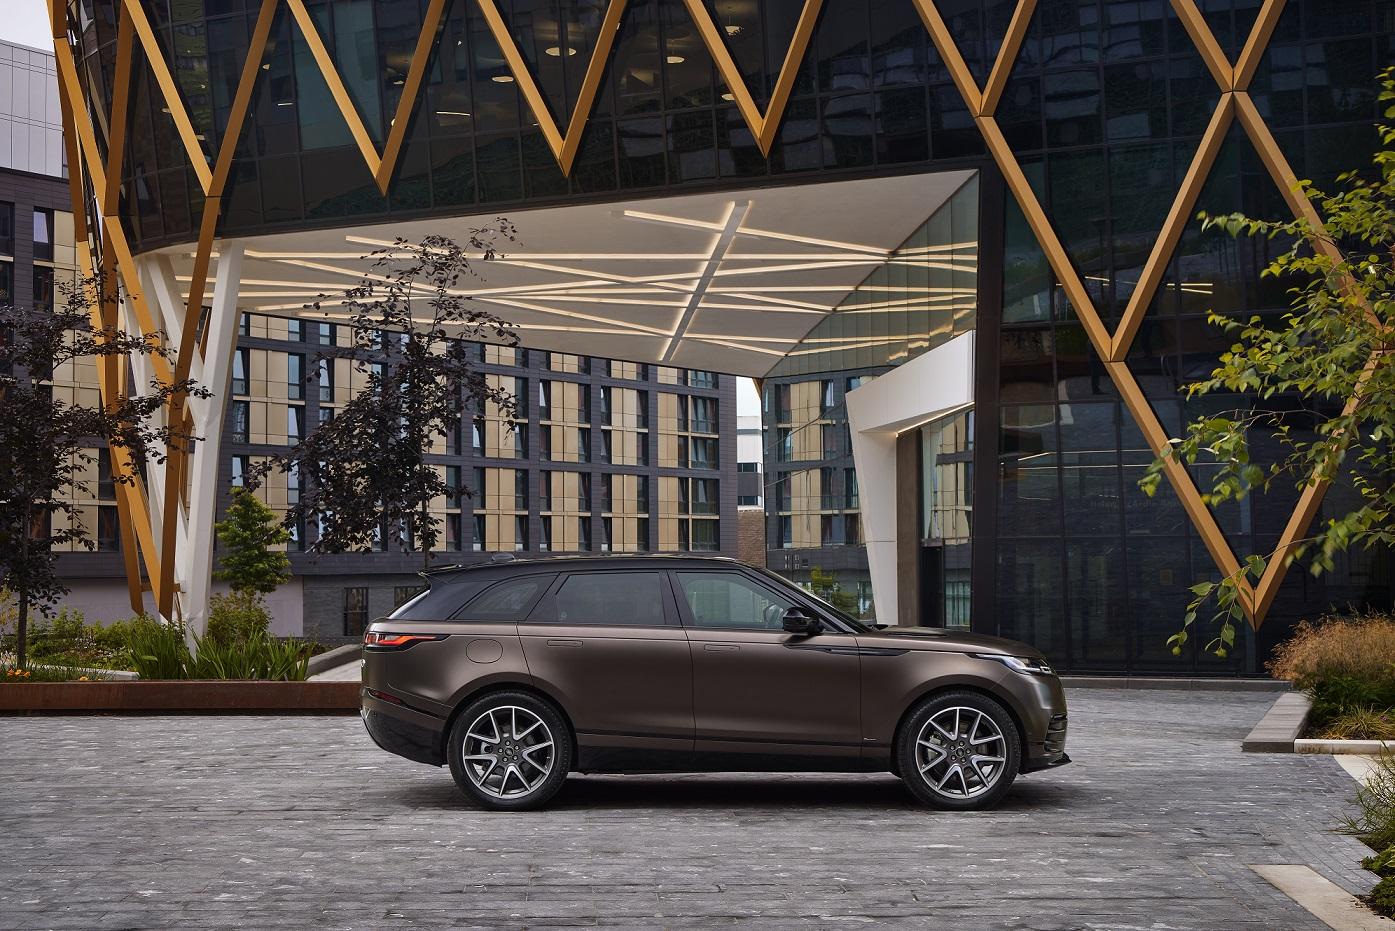 ELEGANT NEW BRONZE COLLECTION EDITION AND SPORTY P300 HST BROADEN RANGE  ROVER EVOQUE LINE-UP